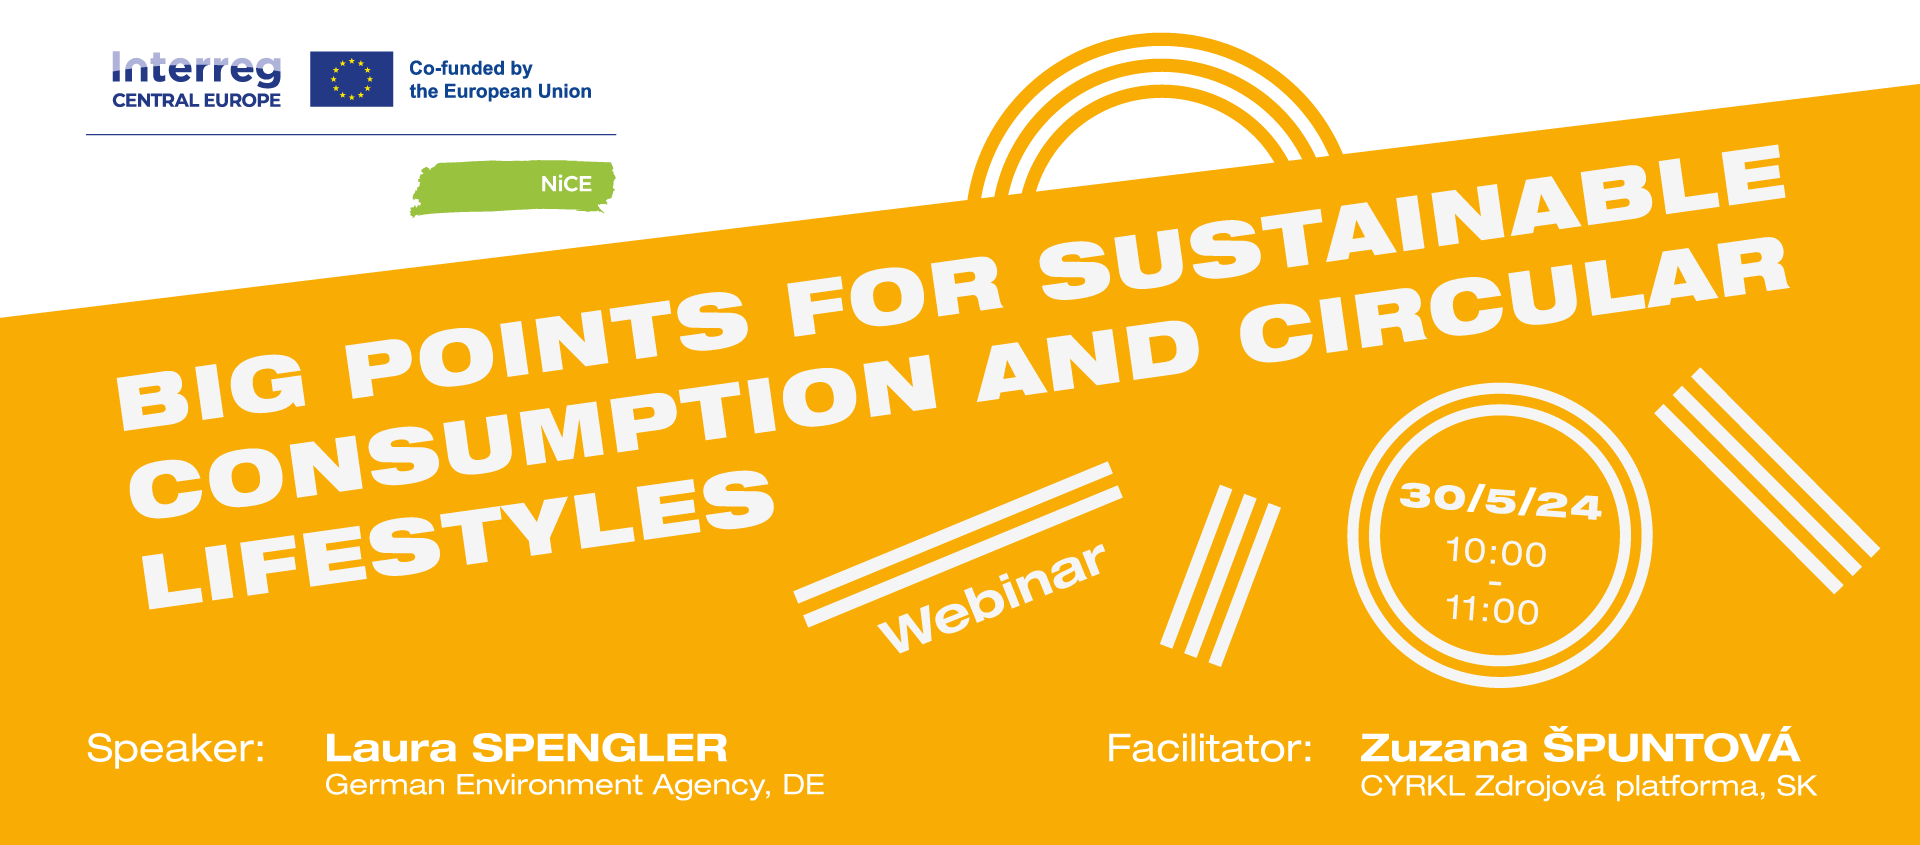 NiCE Webinar: Big Points for Sustainable Consumption and Circular Lifestyles